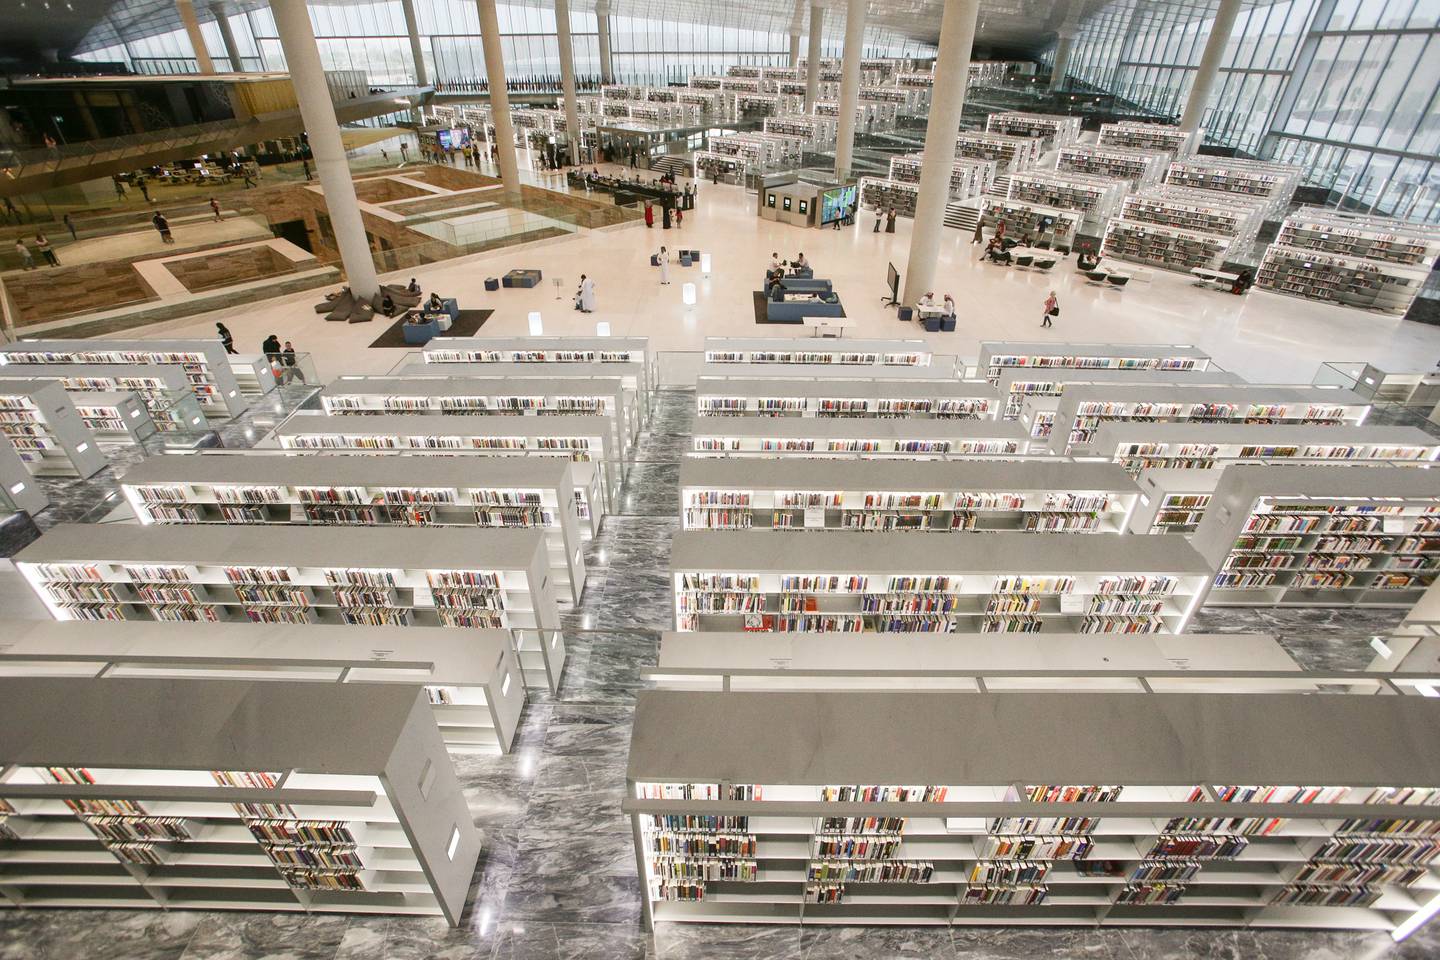 Qatar National Library. Photo: Getty Images